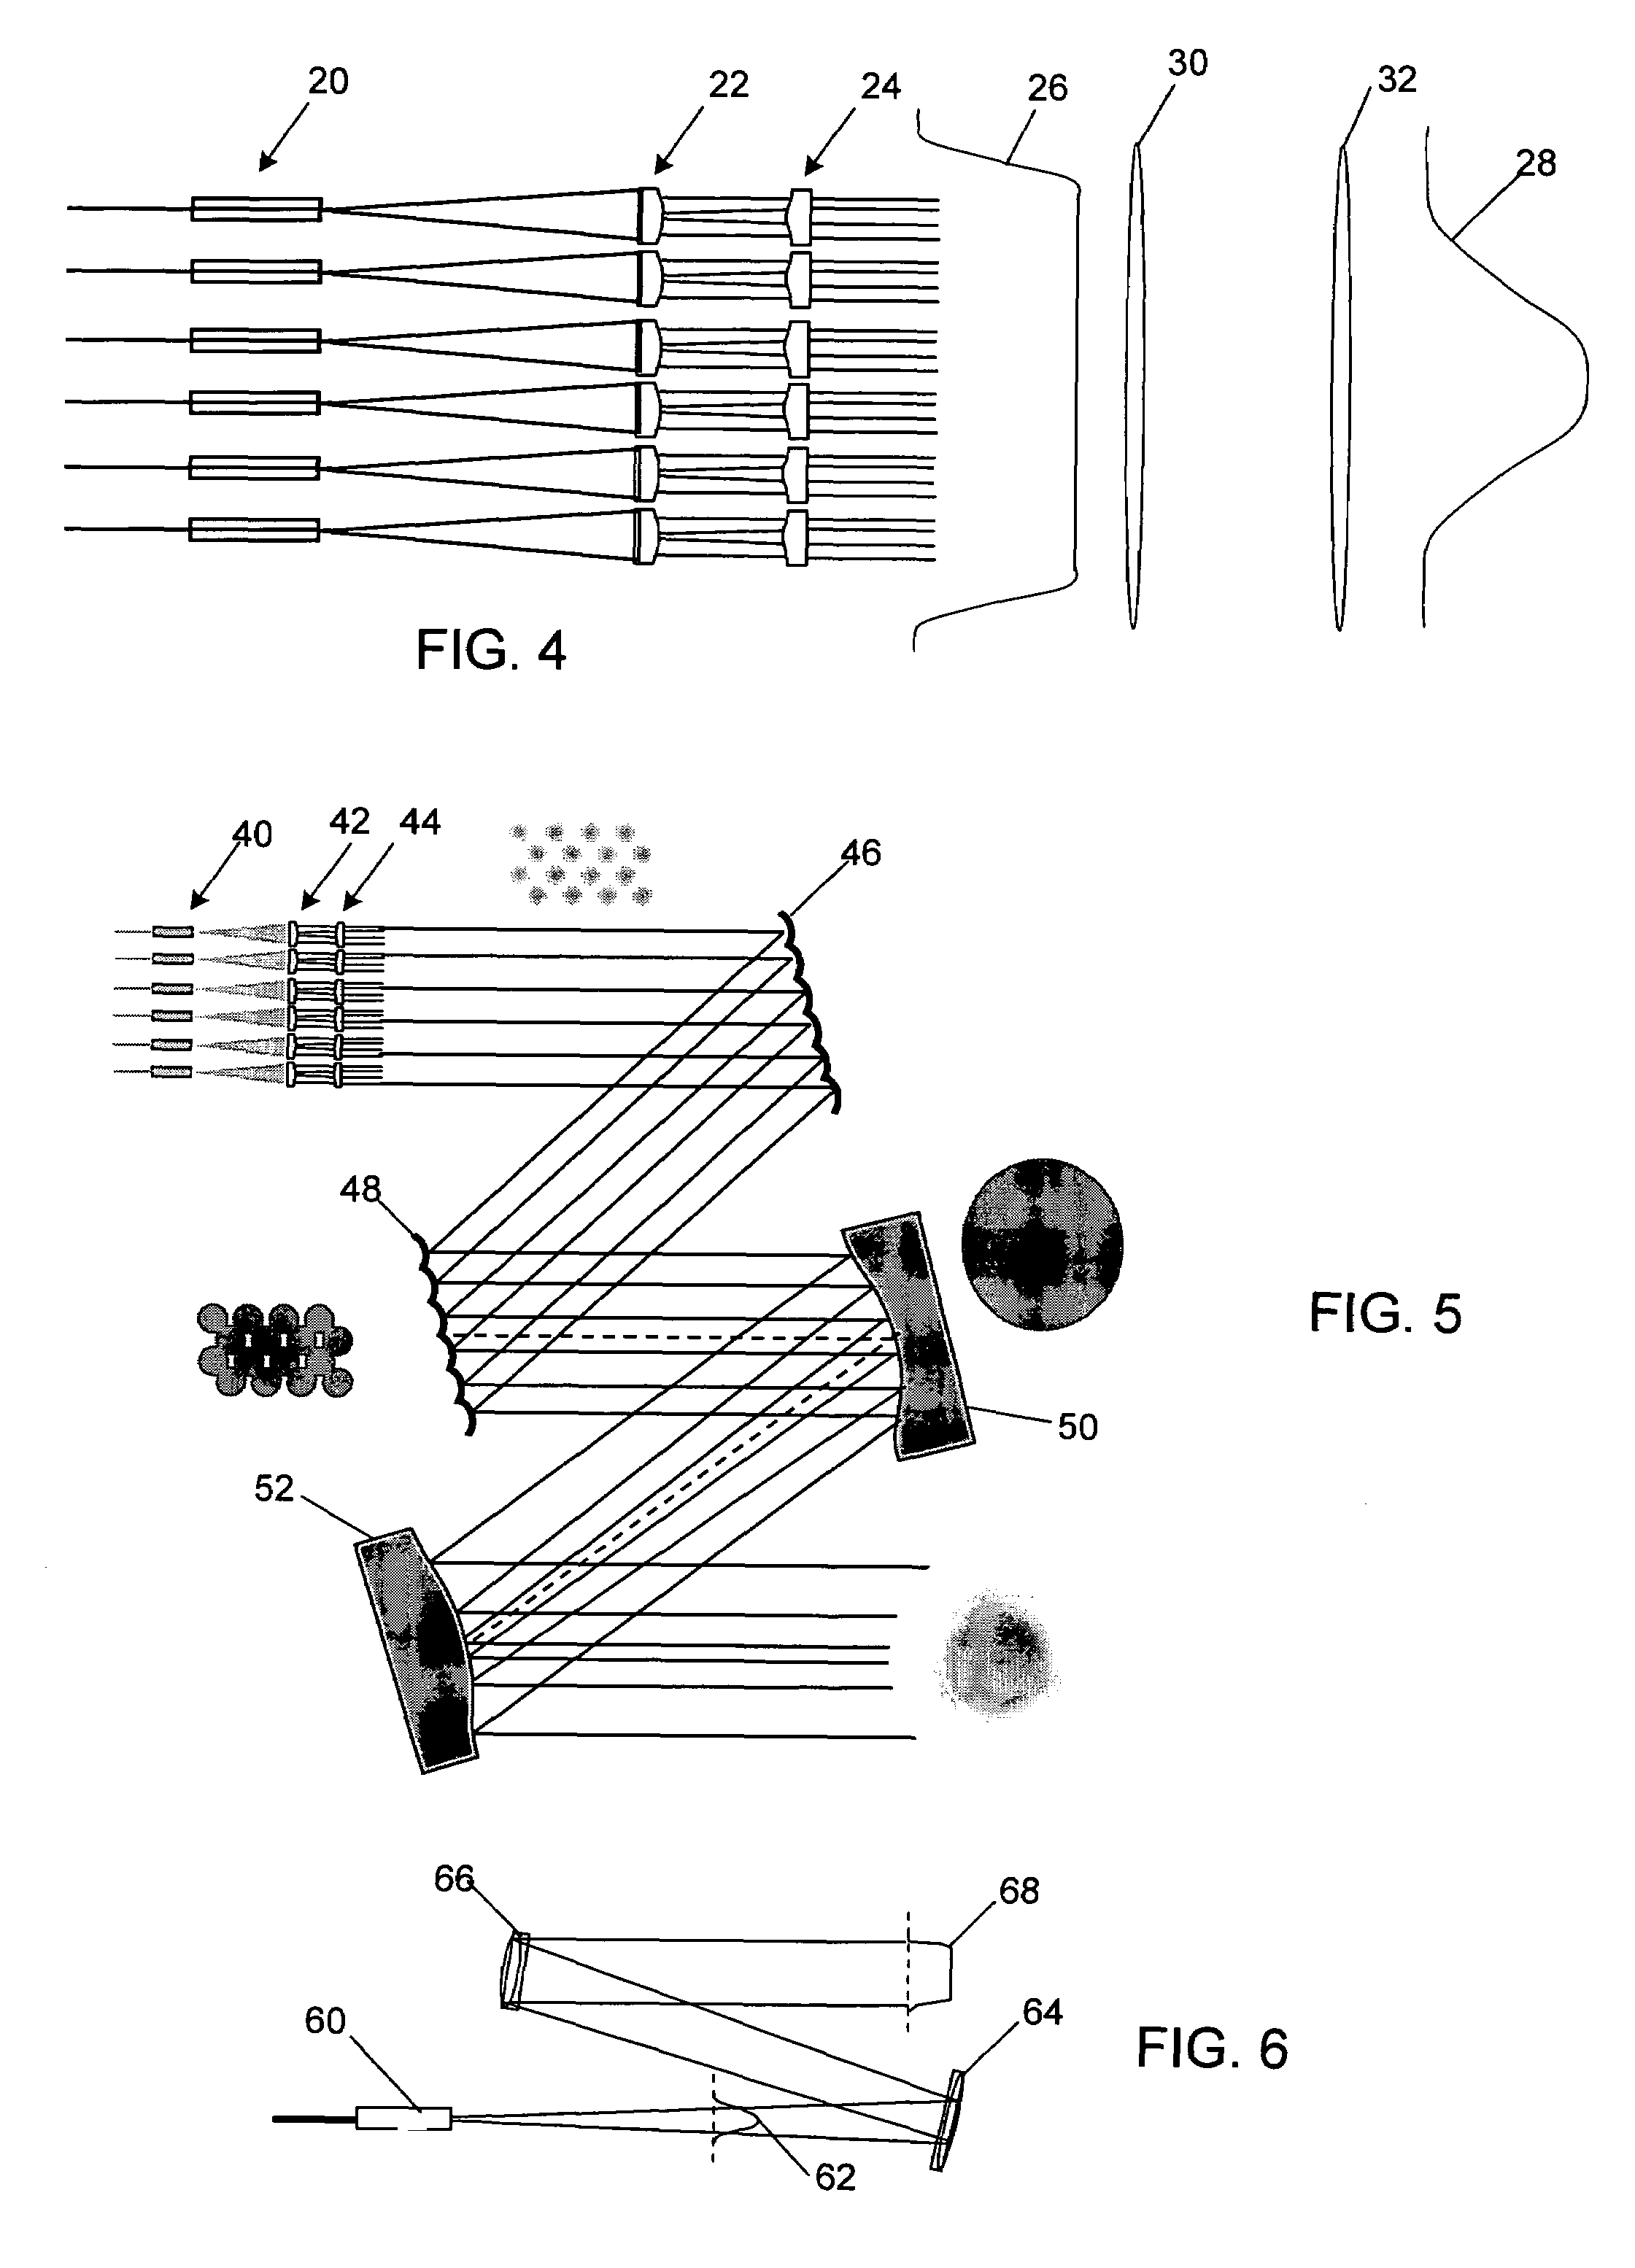 Method and apparatus for optimizing the target intensity distribution transmitted from a fiber coupled array